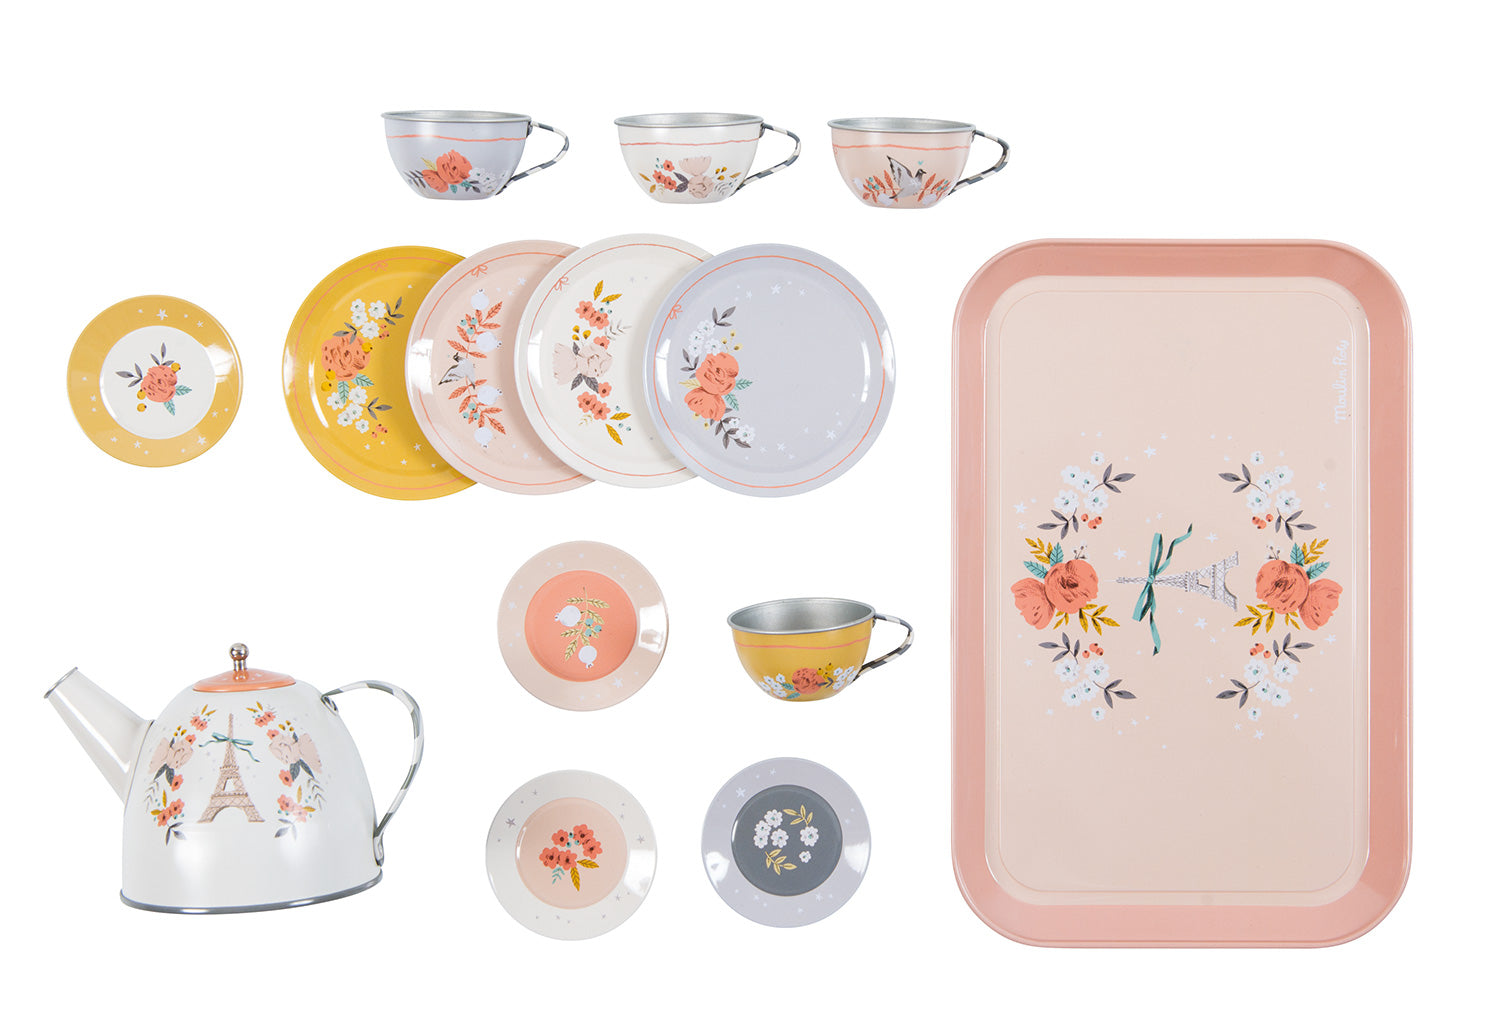 Metal tea service in a carry-case, in pastel colours with a floral pattern and delicate refined illustrations of Paris by Lucille Michieli : a teapot, four plates, four tea cups with their matching saucers.  